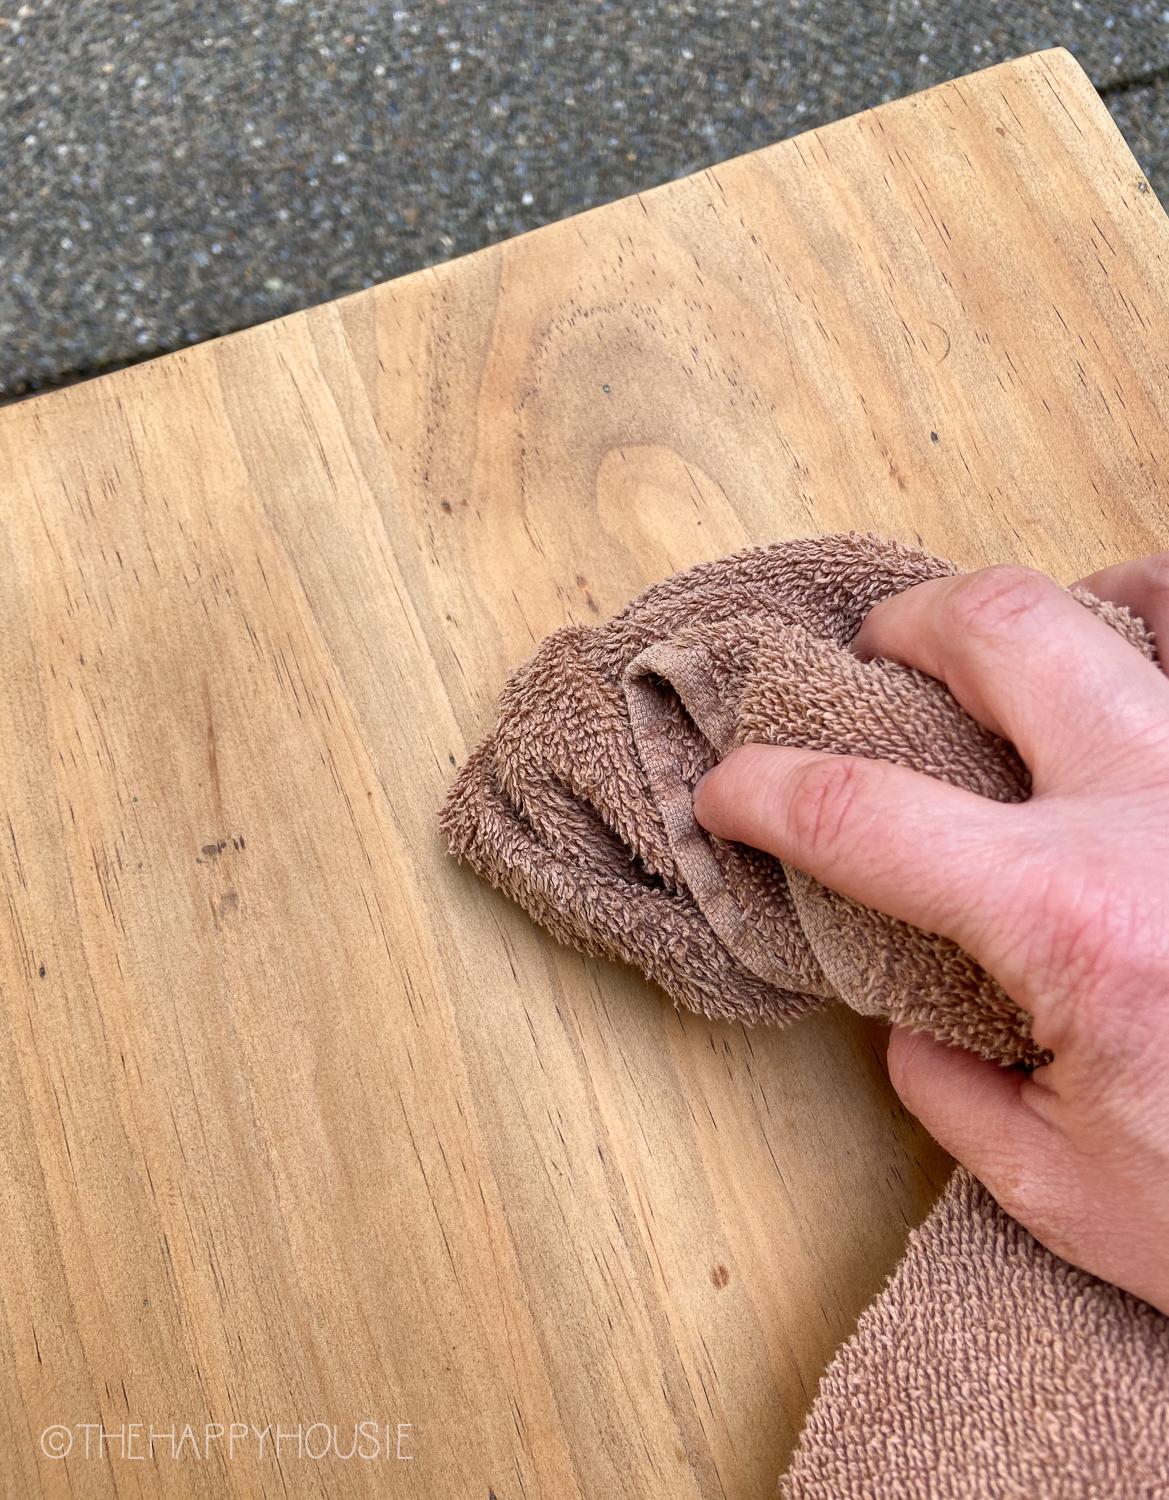 Using a cloth to buff the wood.